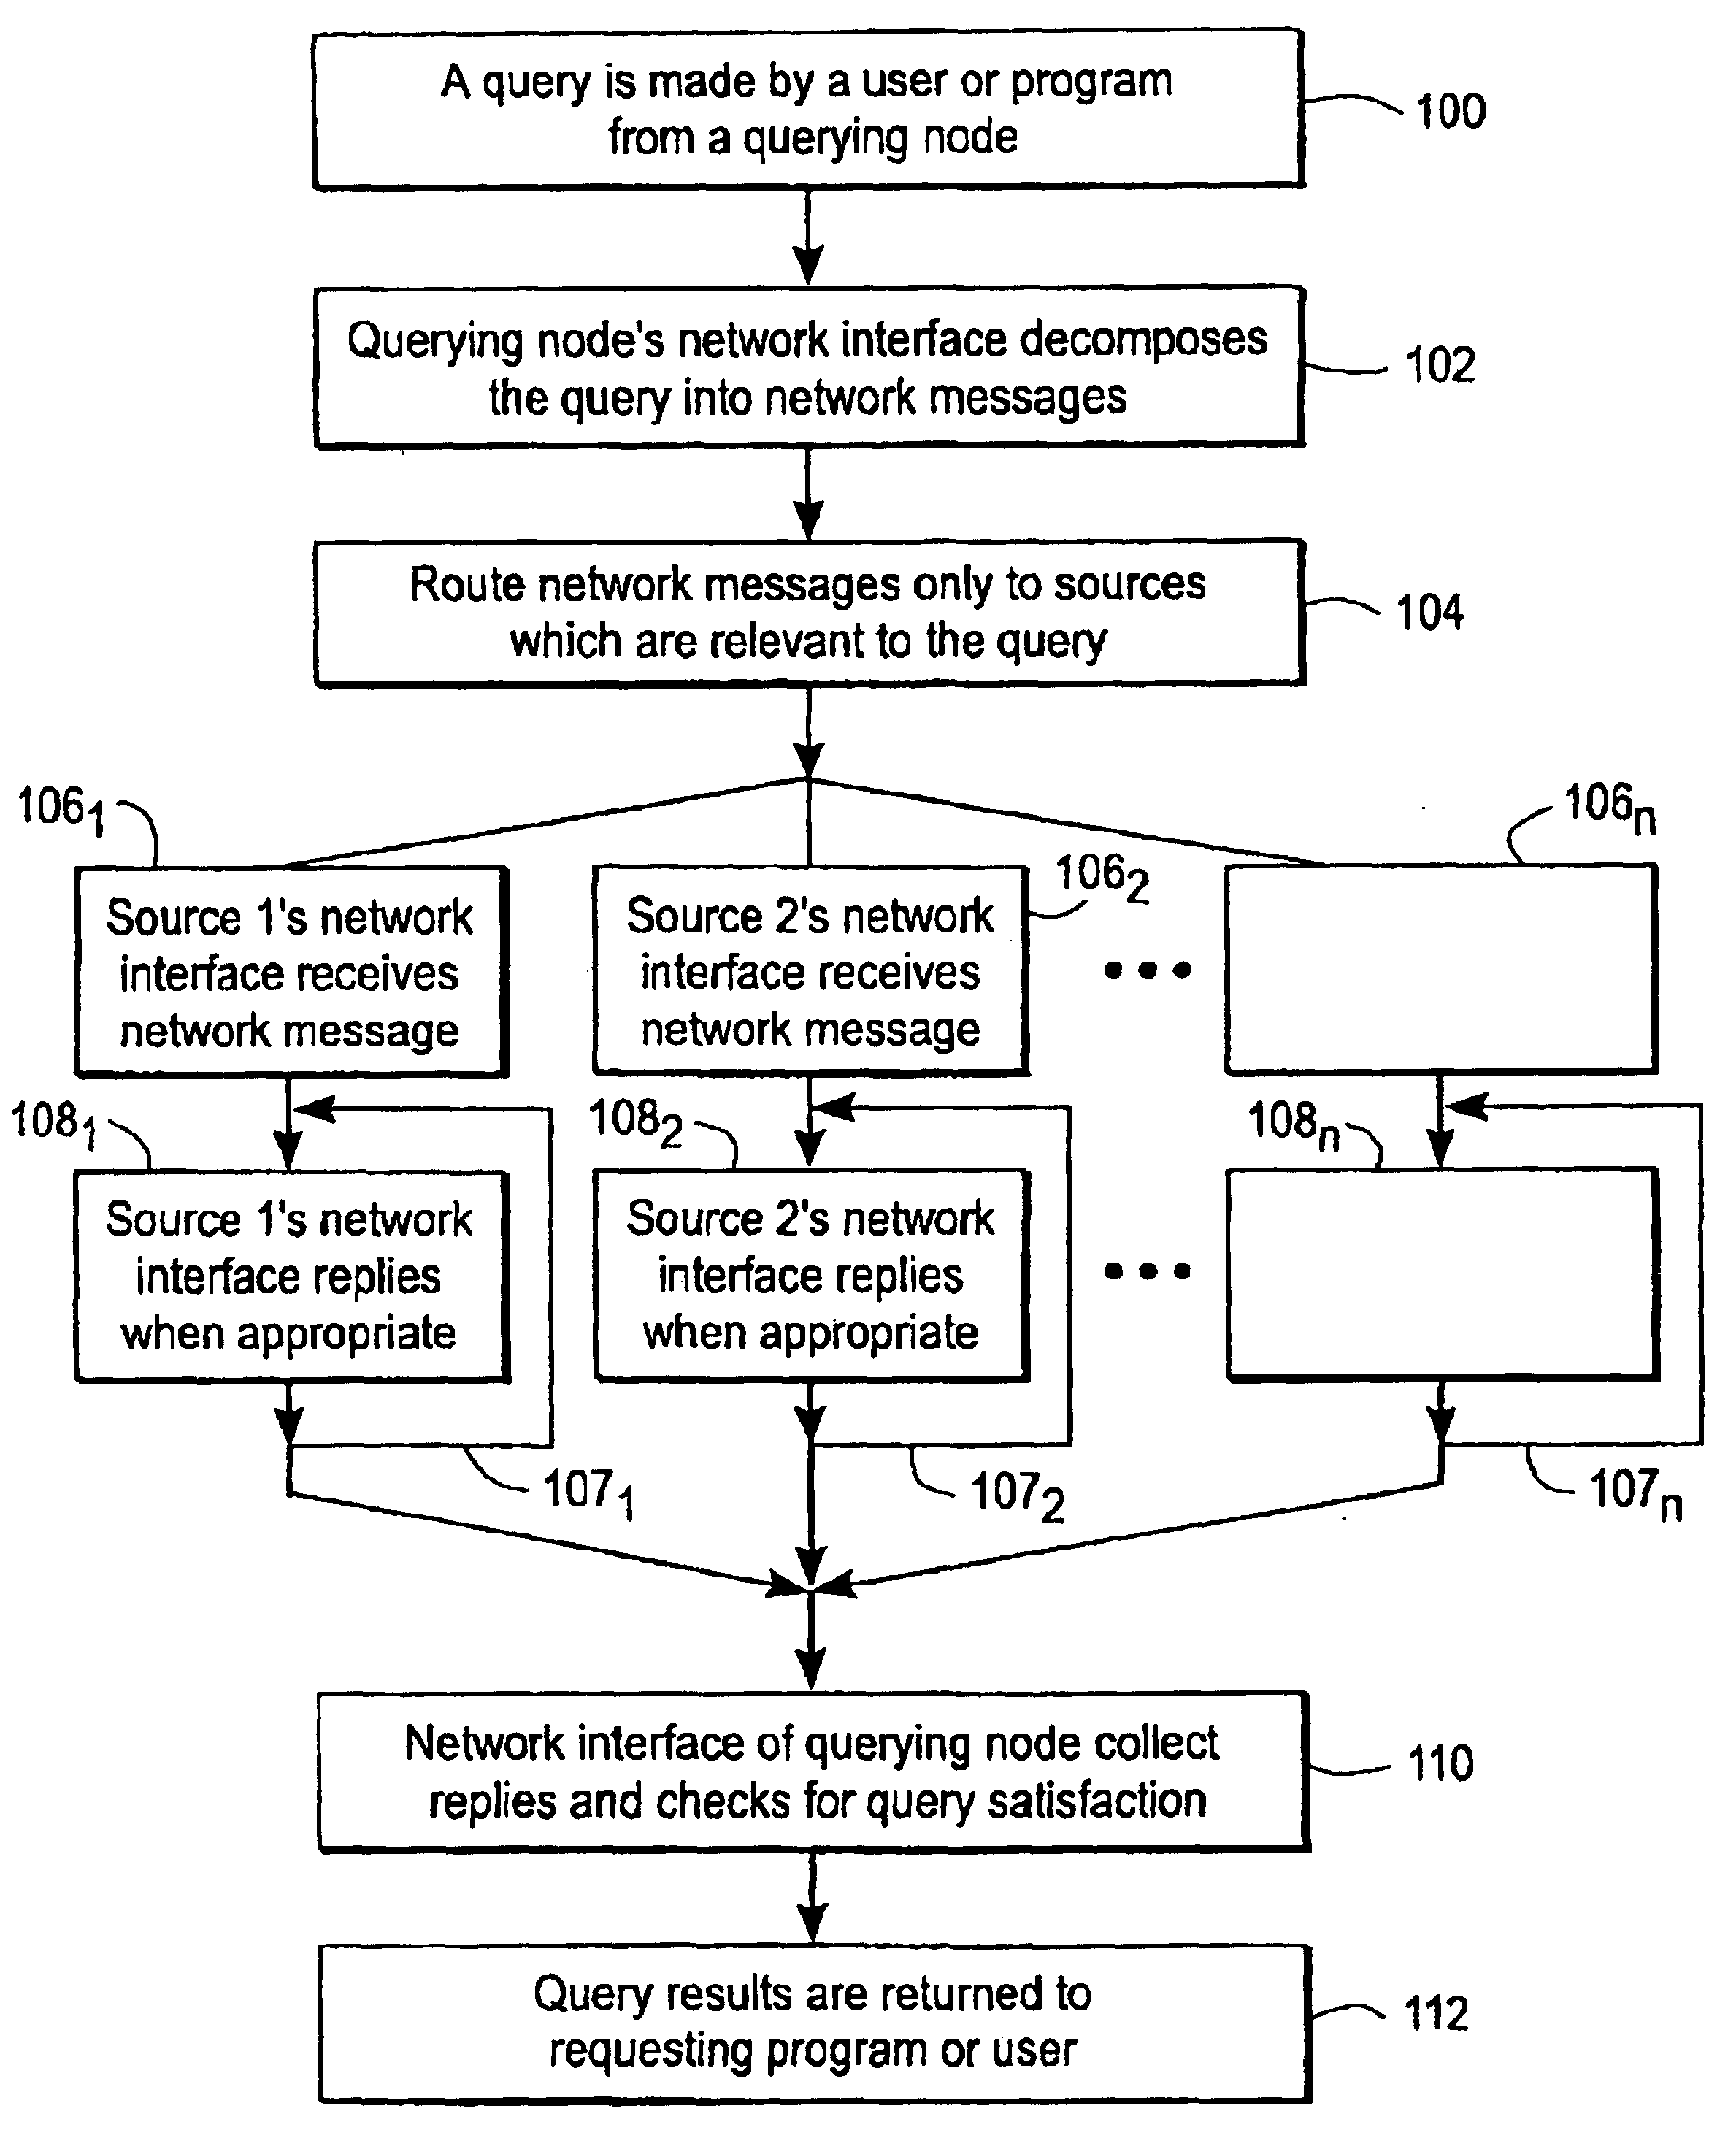 System and methods for highly distributed wide-area data management of a network of data sources through a database interface